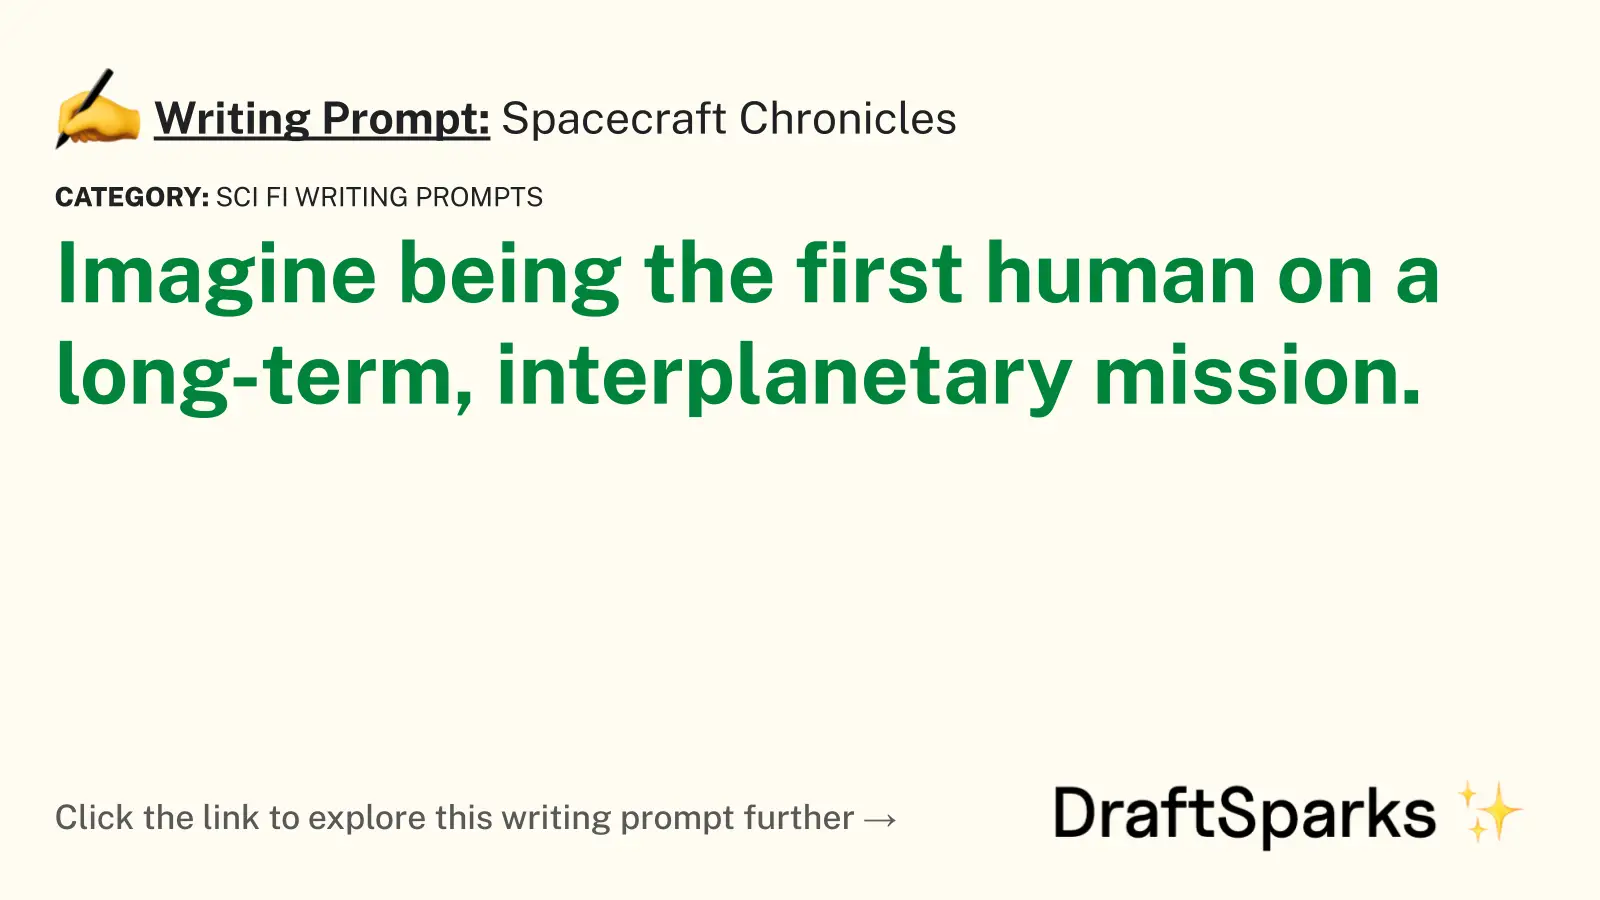 Spacecraft Chronicles